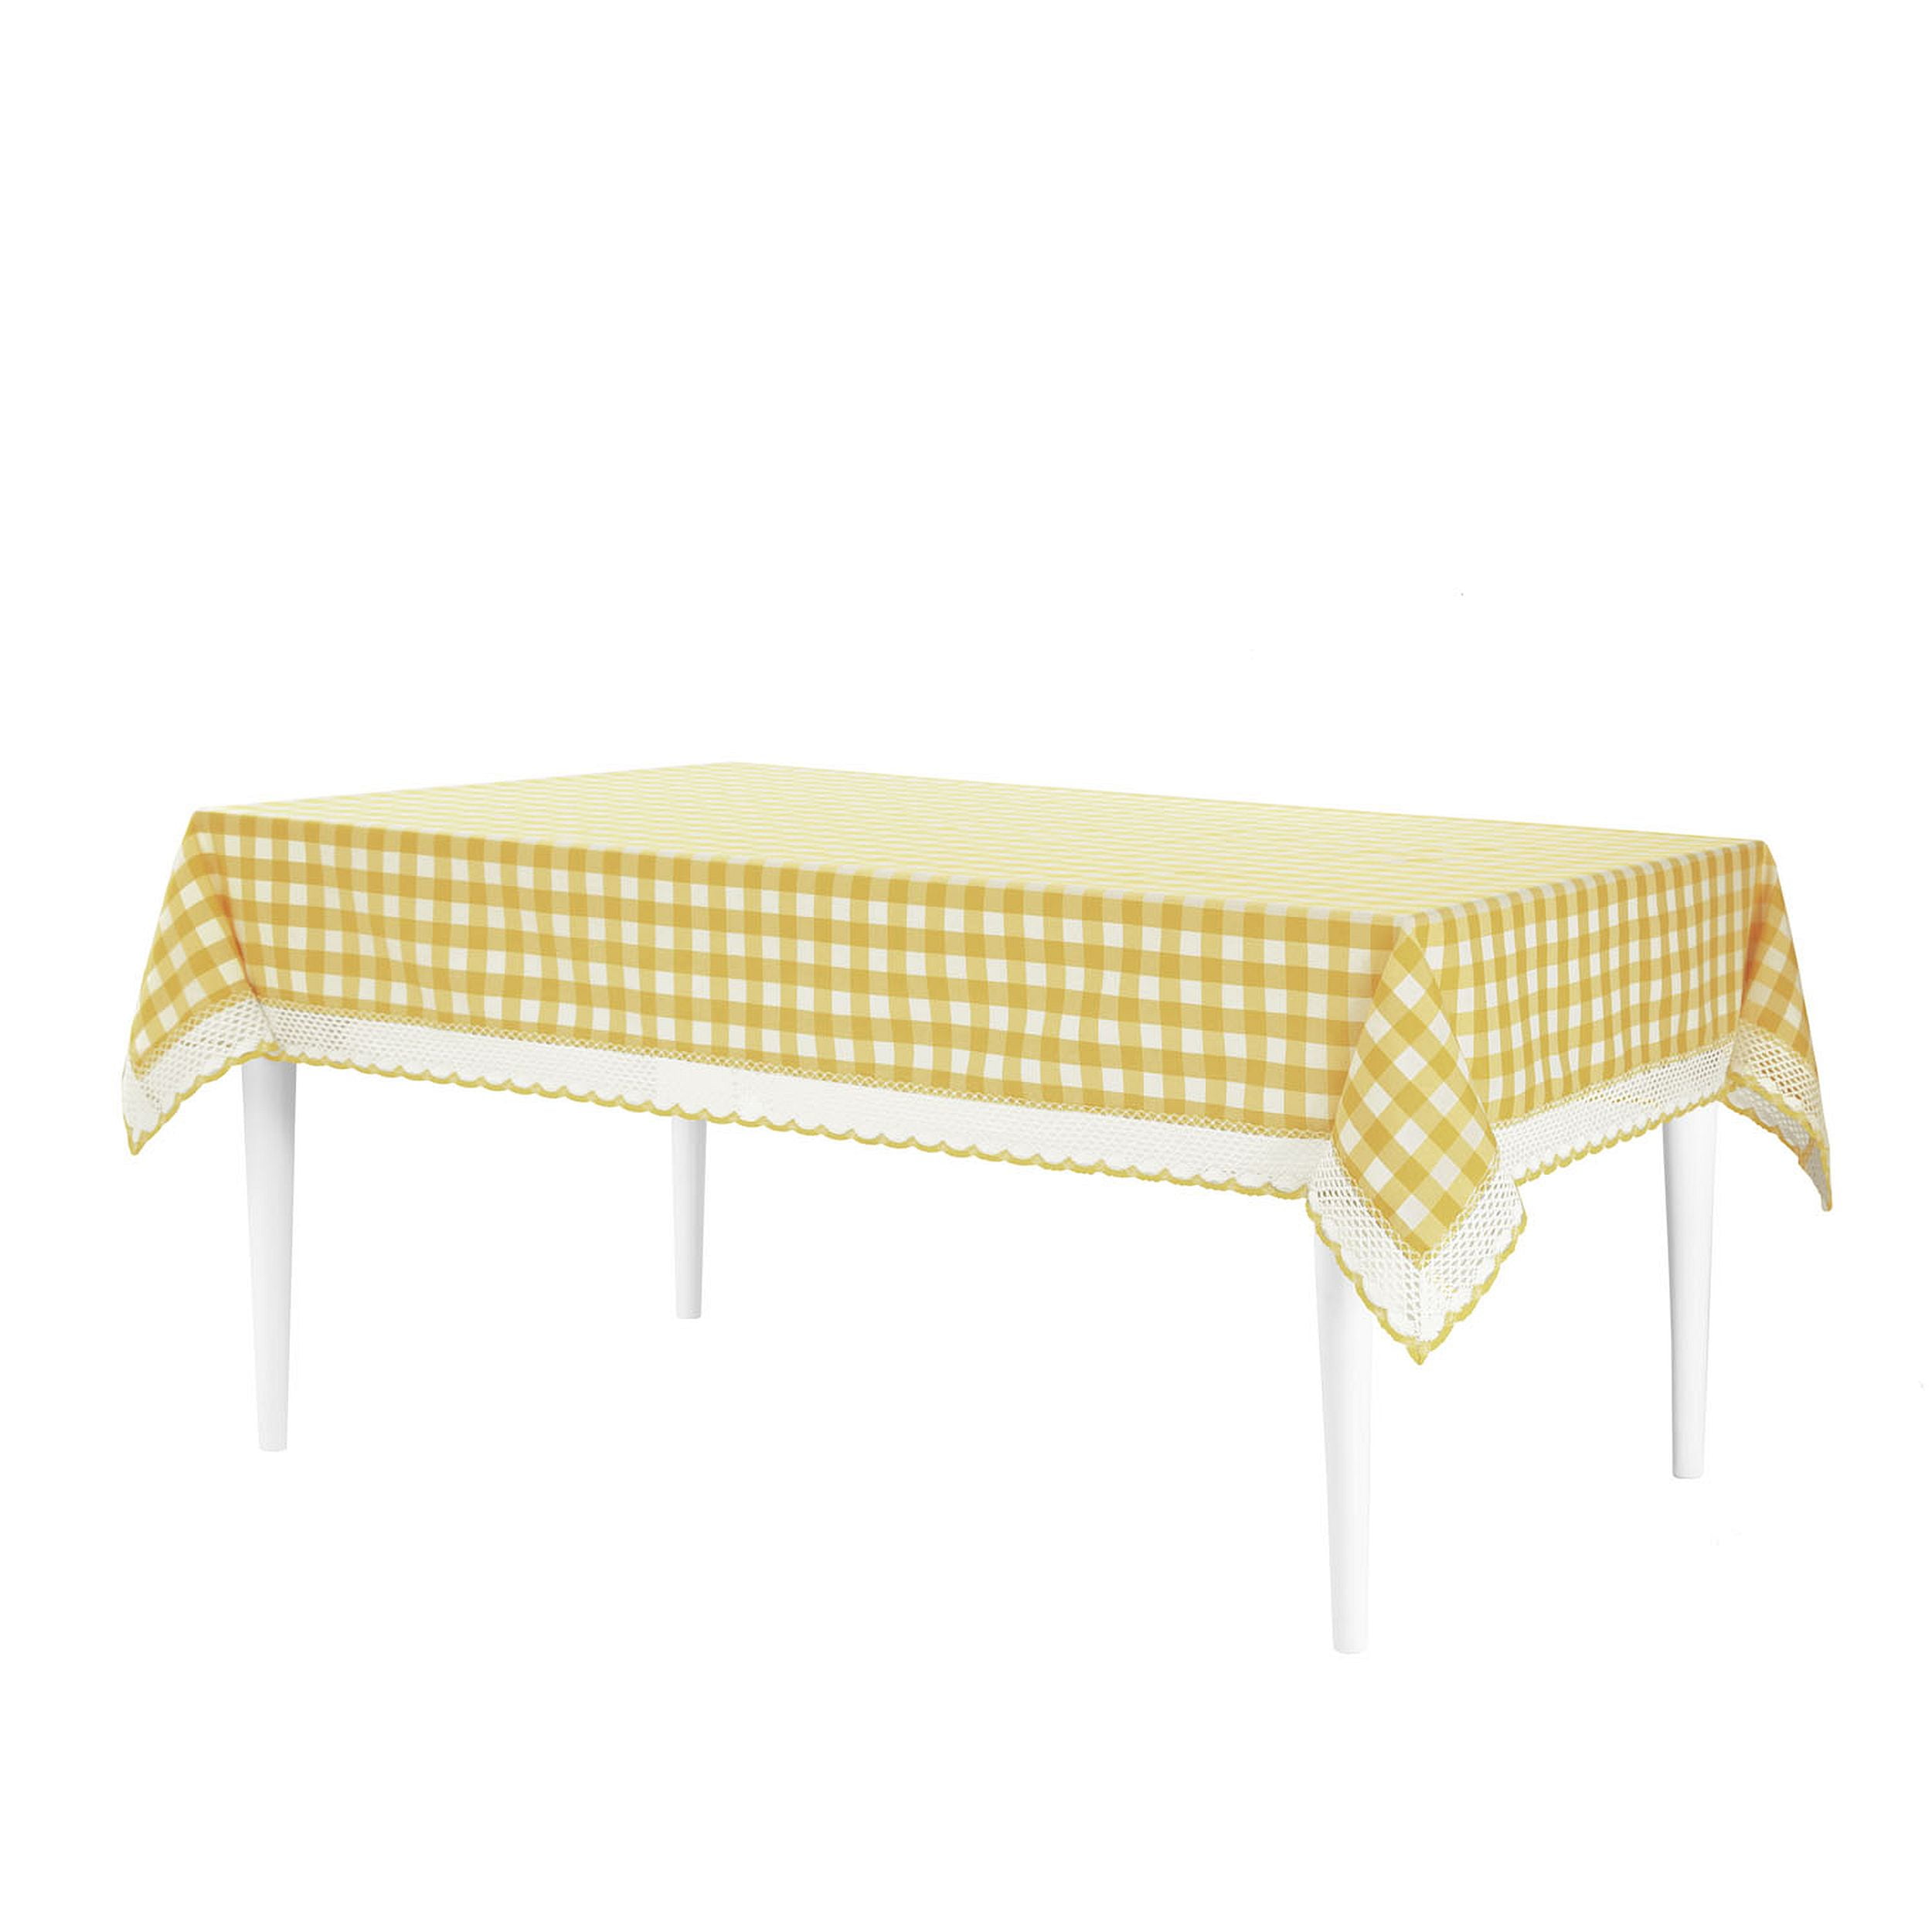 Picture of Achim BCT120YL24 60 x 120 in. Buffalo Check Tablecloth with Macram Trim Yellow